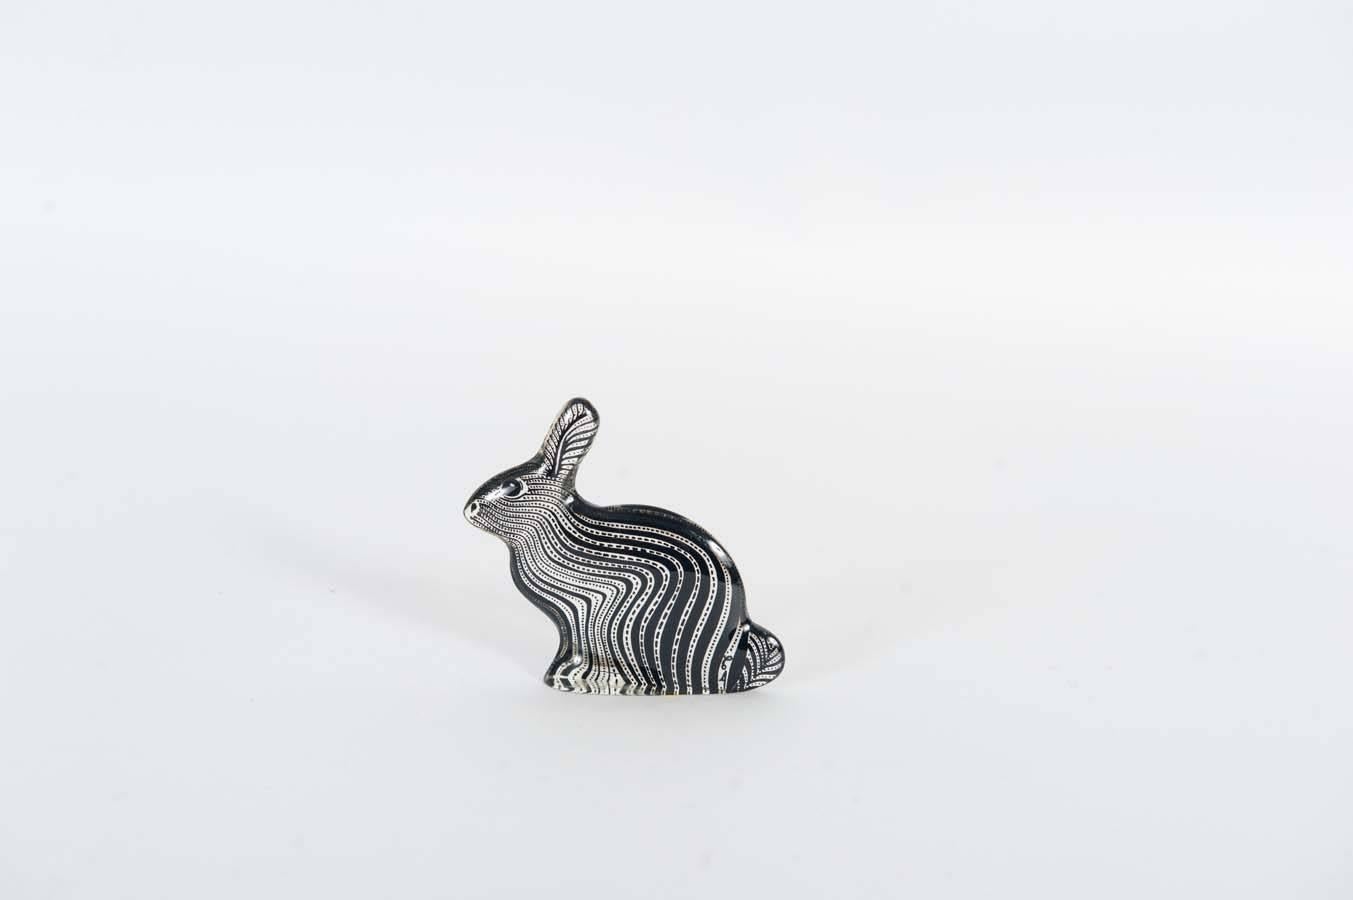 Those two cute Rodents are made of Lucite by Abraham Palatnik. There have a black and transparent pattern.
The rabbit measures 7 cm in height, 9 cm in length and 1.5 cm in depth.
The hare measures 7.5 cm in height, 8.5 cm in length and 1.5 cm in